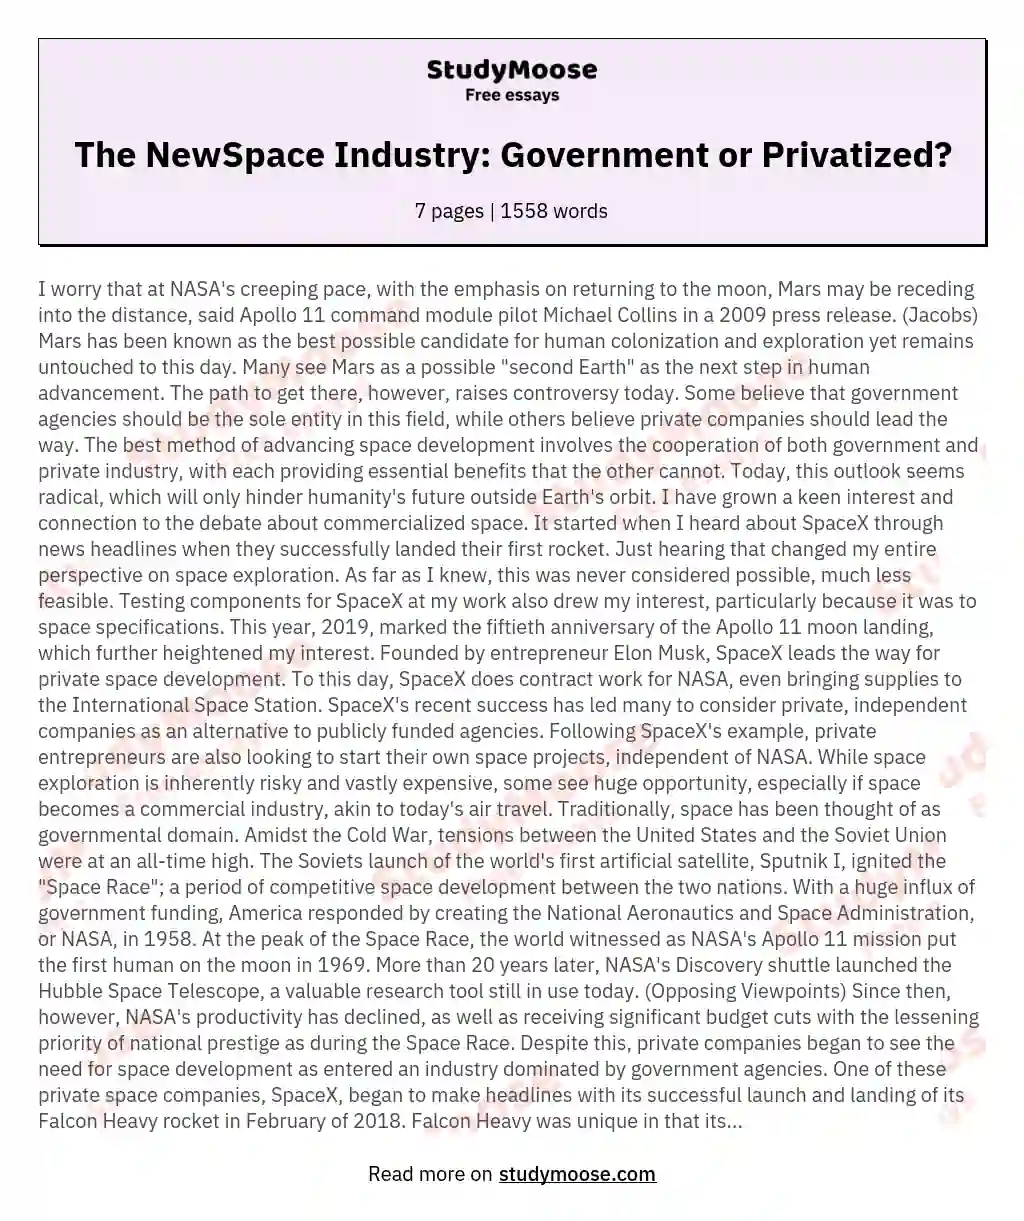 The NewSpace Industry: Government or Privatized? essay